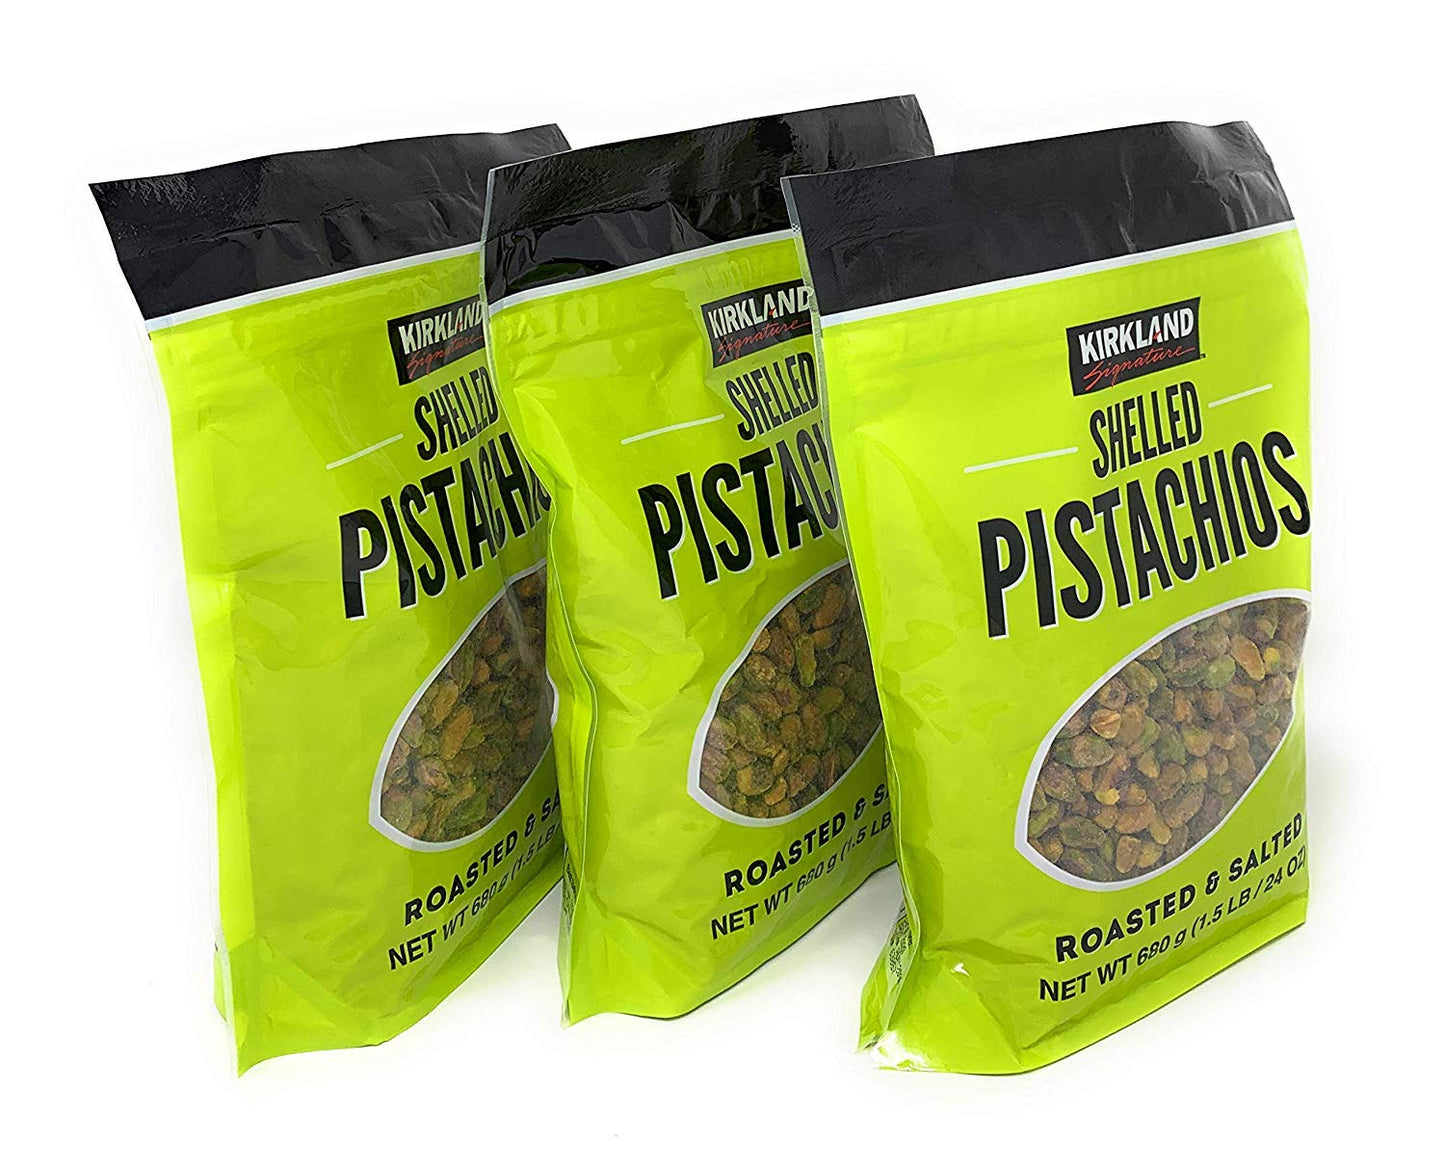 Kirkland Signature rIVapM Shelled Pistachios, Roasted & Salted, 24 Ounce (Pack of 3)